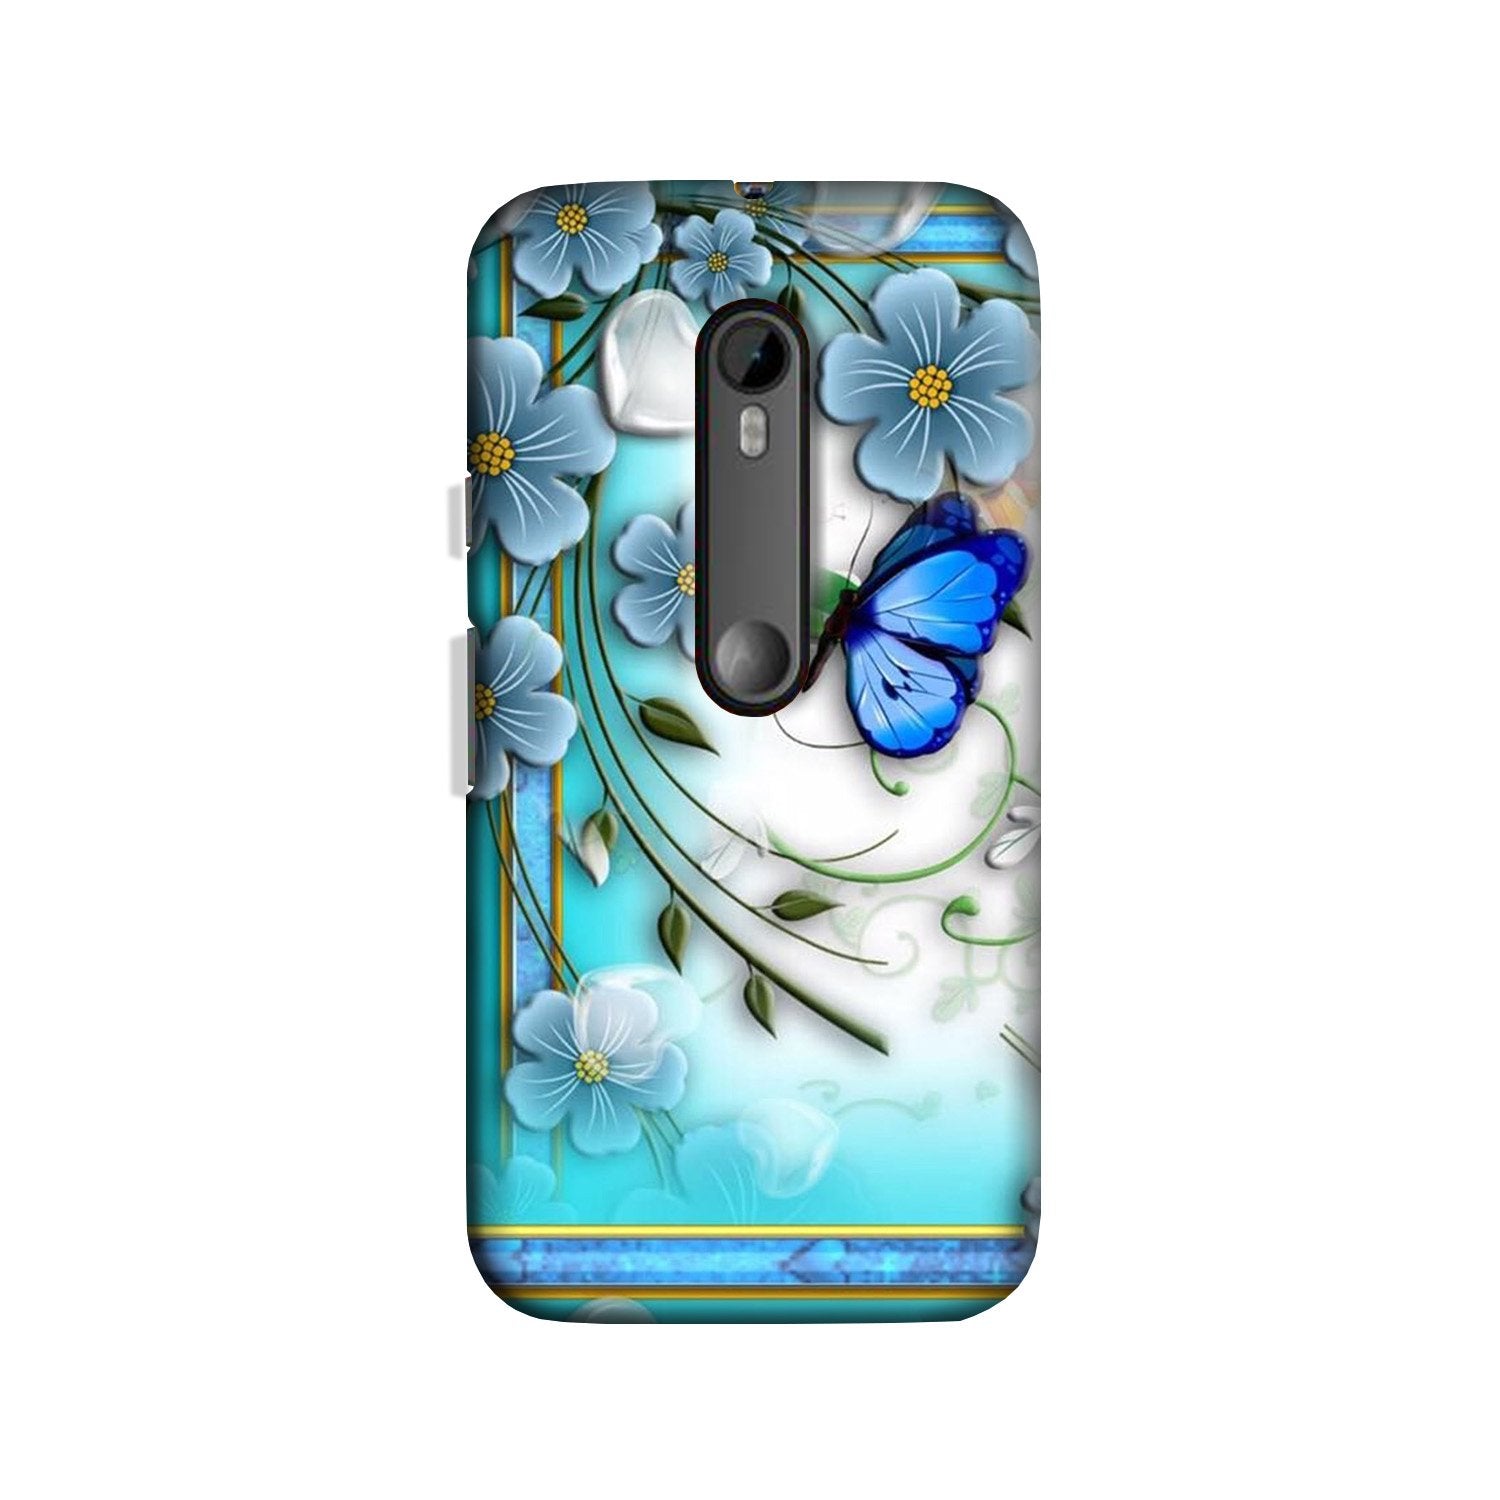 Blue Butterfly Case for Moto X Play